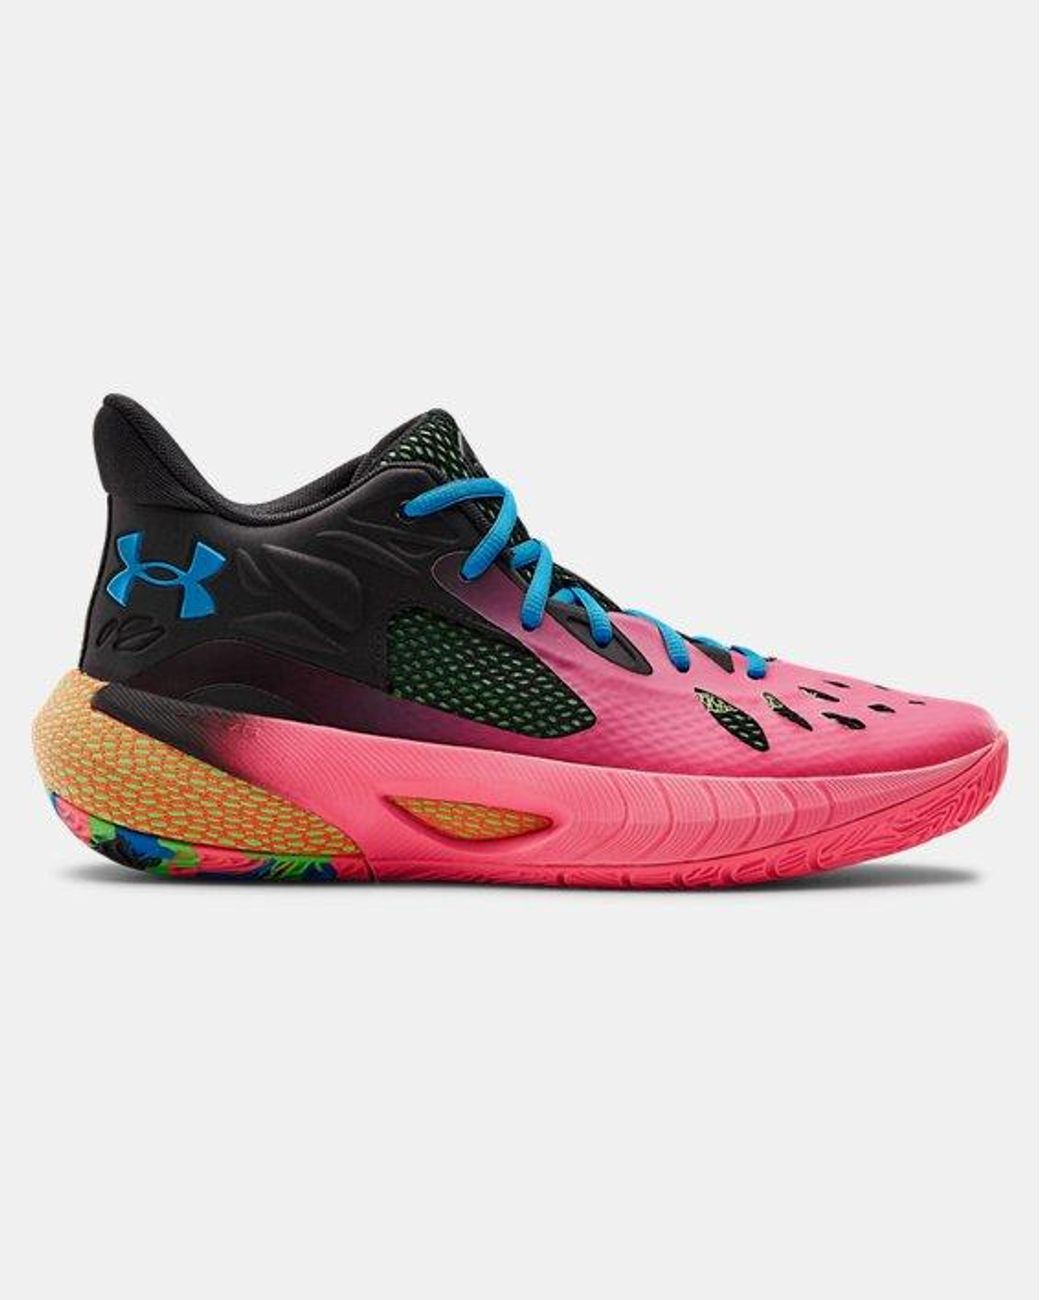 Under Armour Ua Hovr Havoc 3 Basketball Shoes in Pink